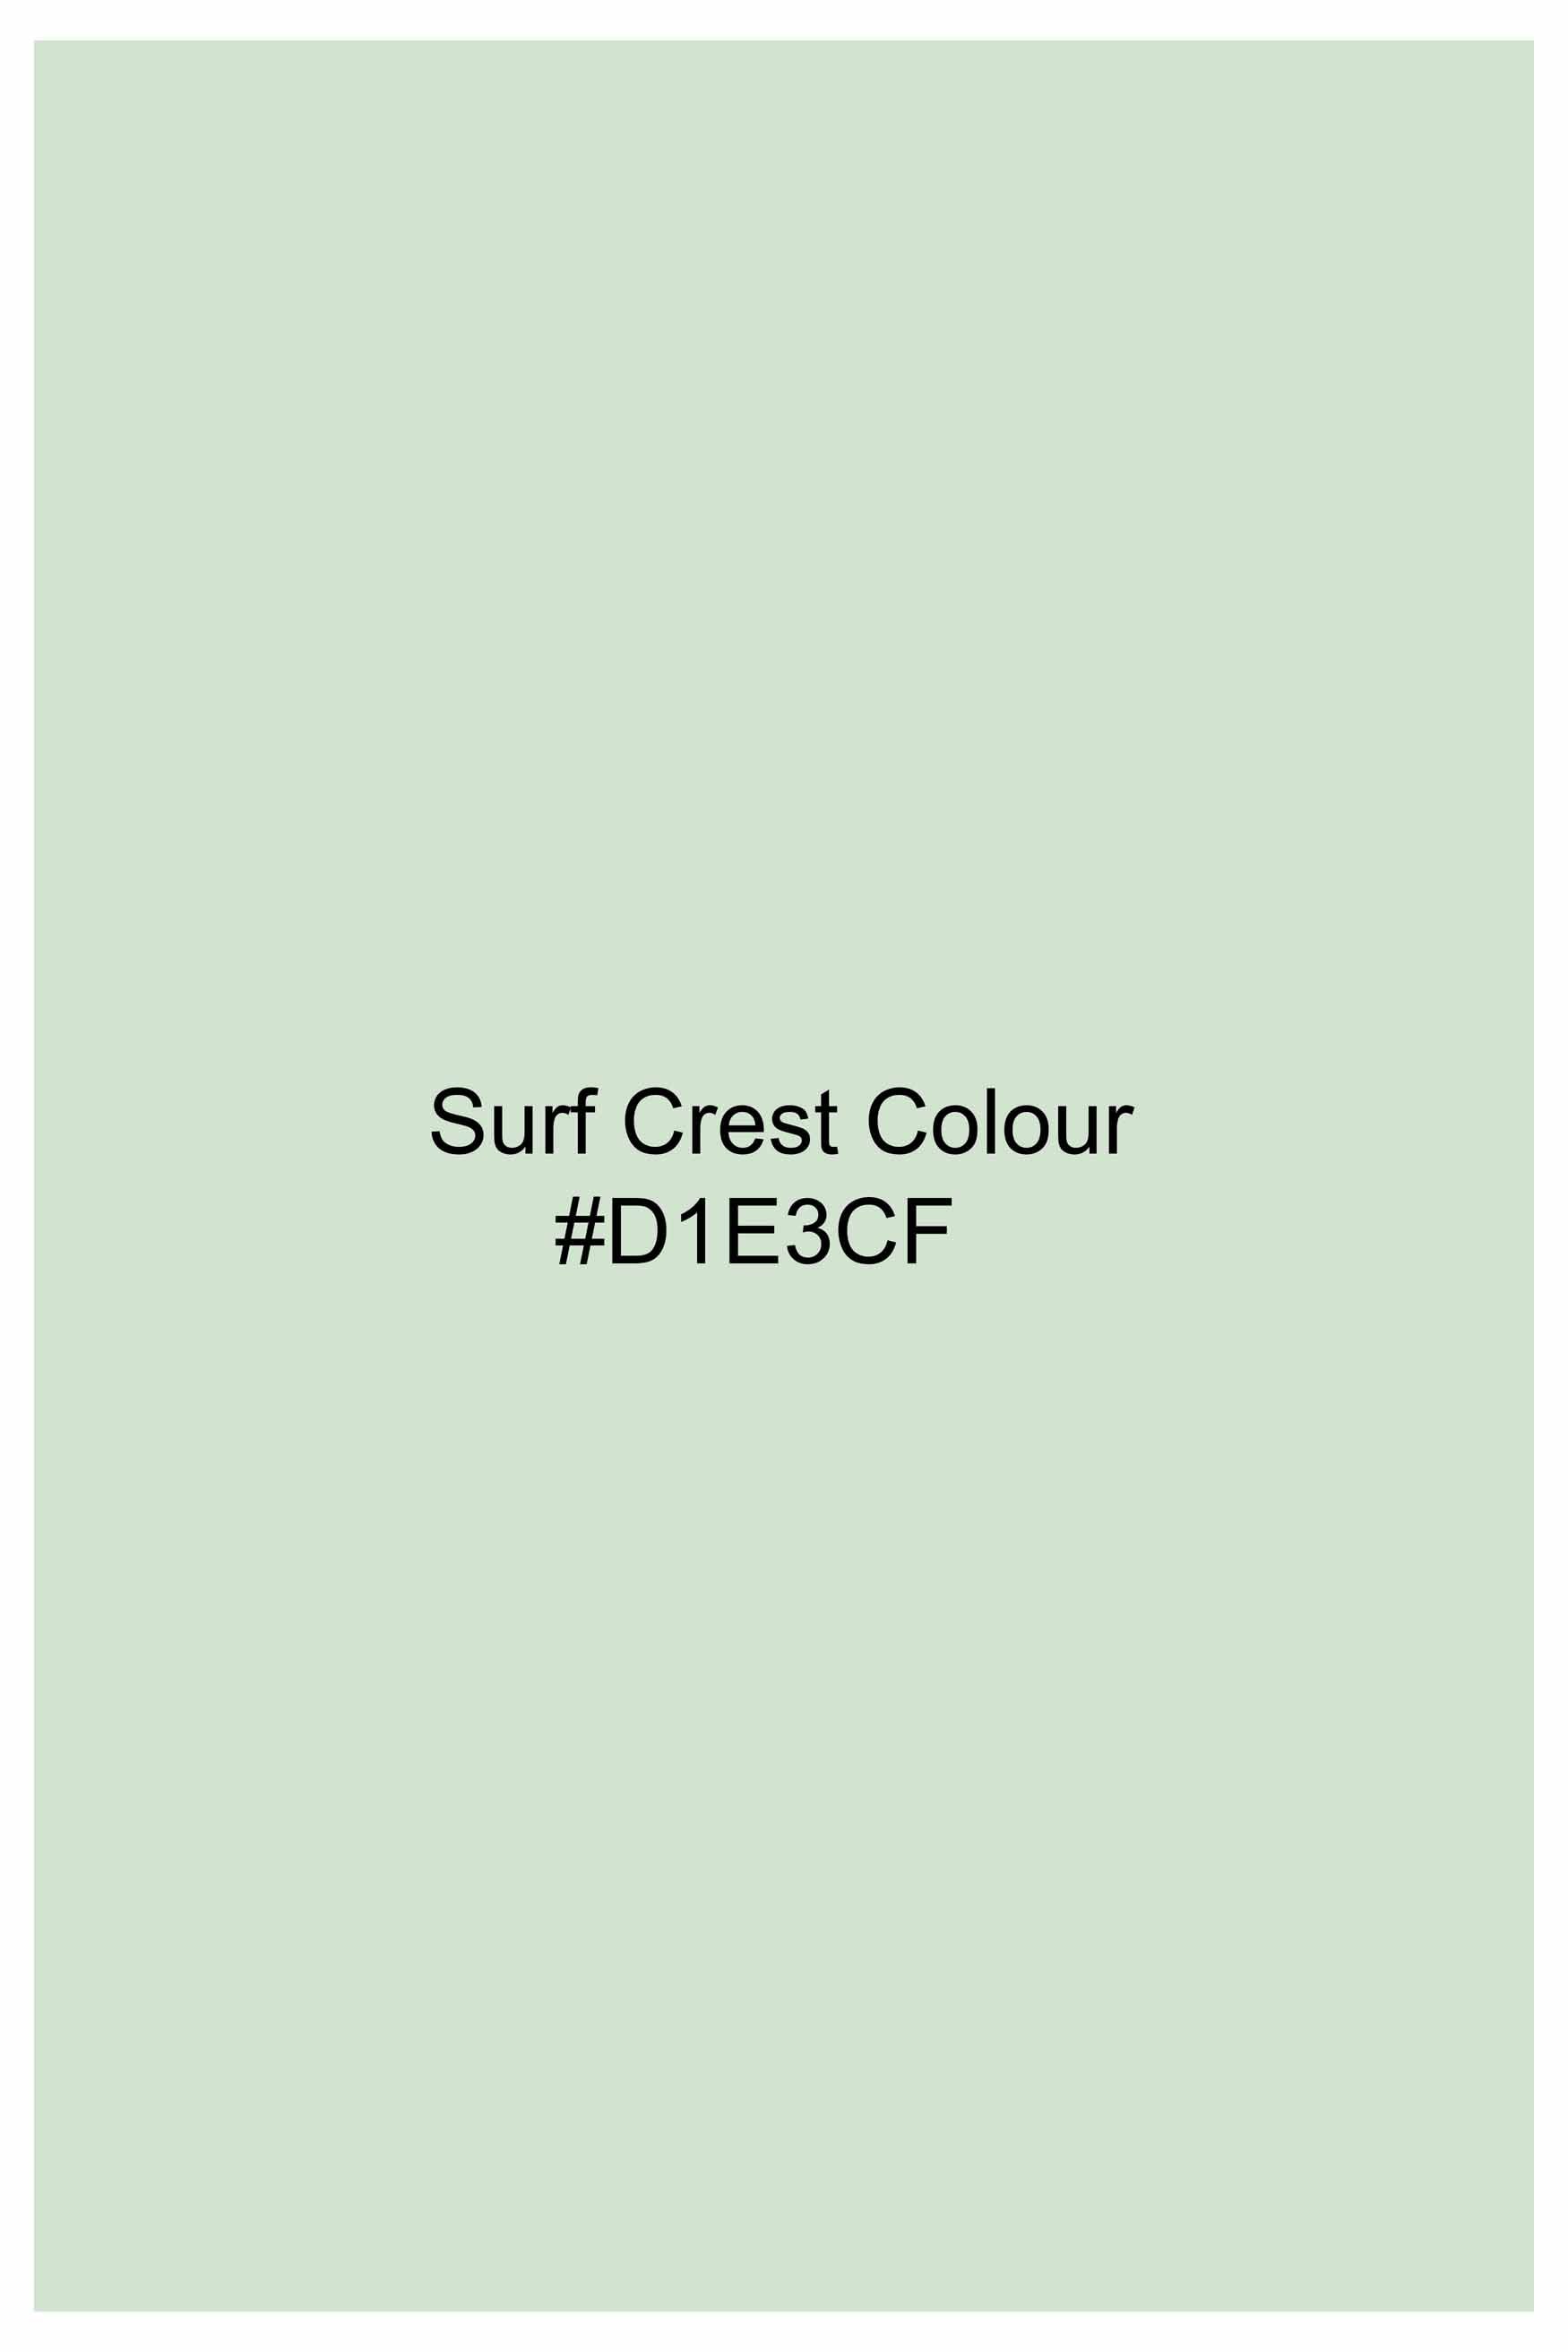 Surf Crest Green Funky Embroidered Royal Oxford Designer Shirt 6337-CA-E180-38, 6337-CA-E180-H-38, 6337-CA-E180-39, 6337-CA-E180-H-39, 6337-CA-E180-40, 6337-CA-E180-H-40, 6337-CA-E180-42, 6337-CA-E180-H-42, 6337-CA-E180-44, 6337-CA-E180-H-44, 6337-CA-E180-46, 6337-CA-E180-H-46, 6337-CA-E180-48, 6337-CA-E180-H-48, 6337-CA-E180-50, 6337-CA-E180-H-50, 6337-CA-E180-52, 6337-CA-E180-H-52